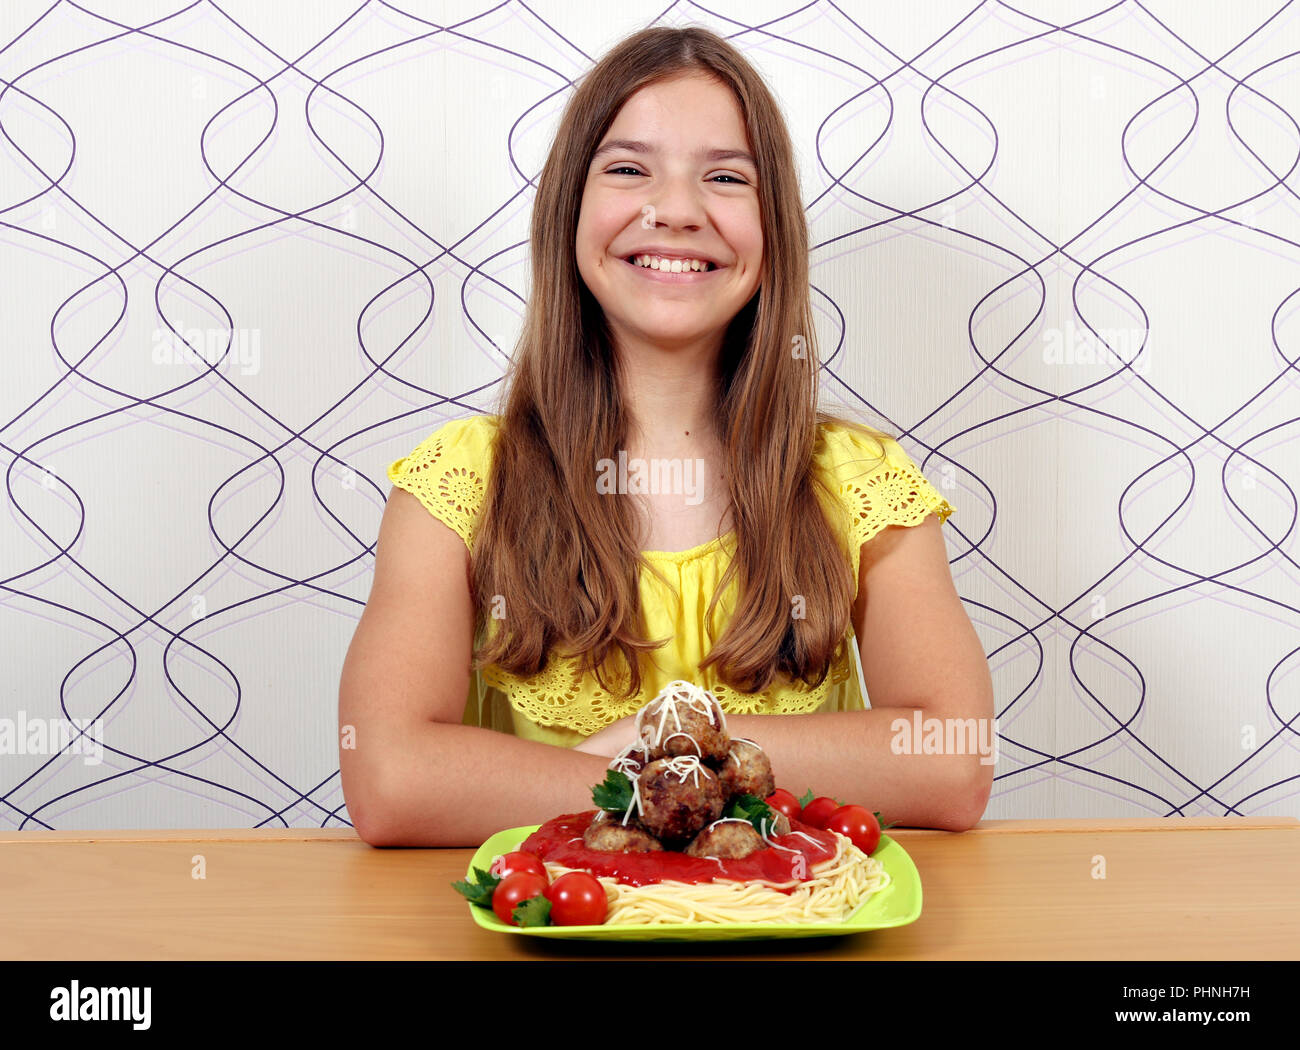 happy girl with spaghetti and meatballs for lunch Stock Photo